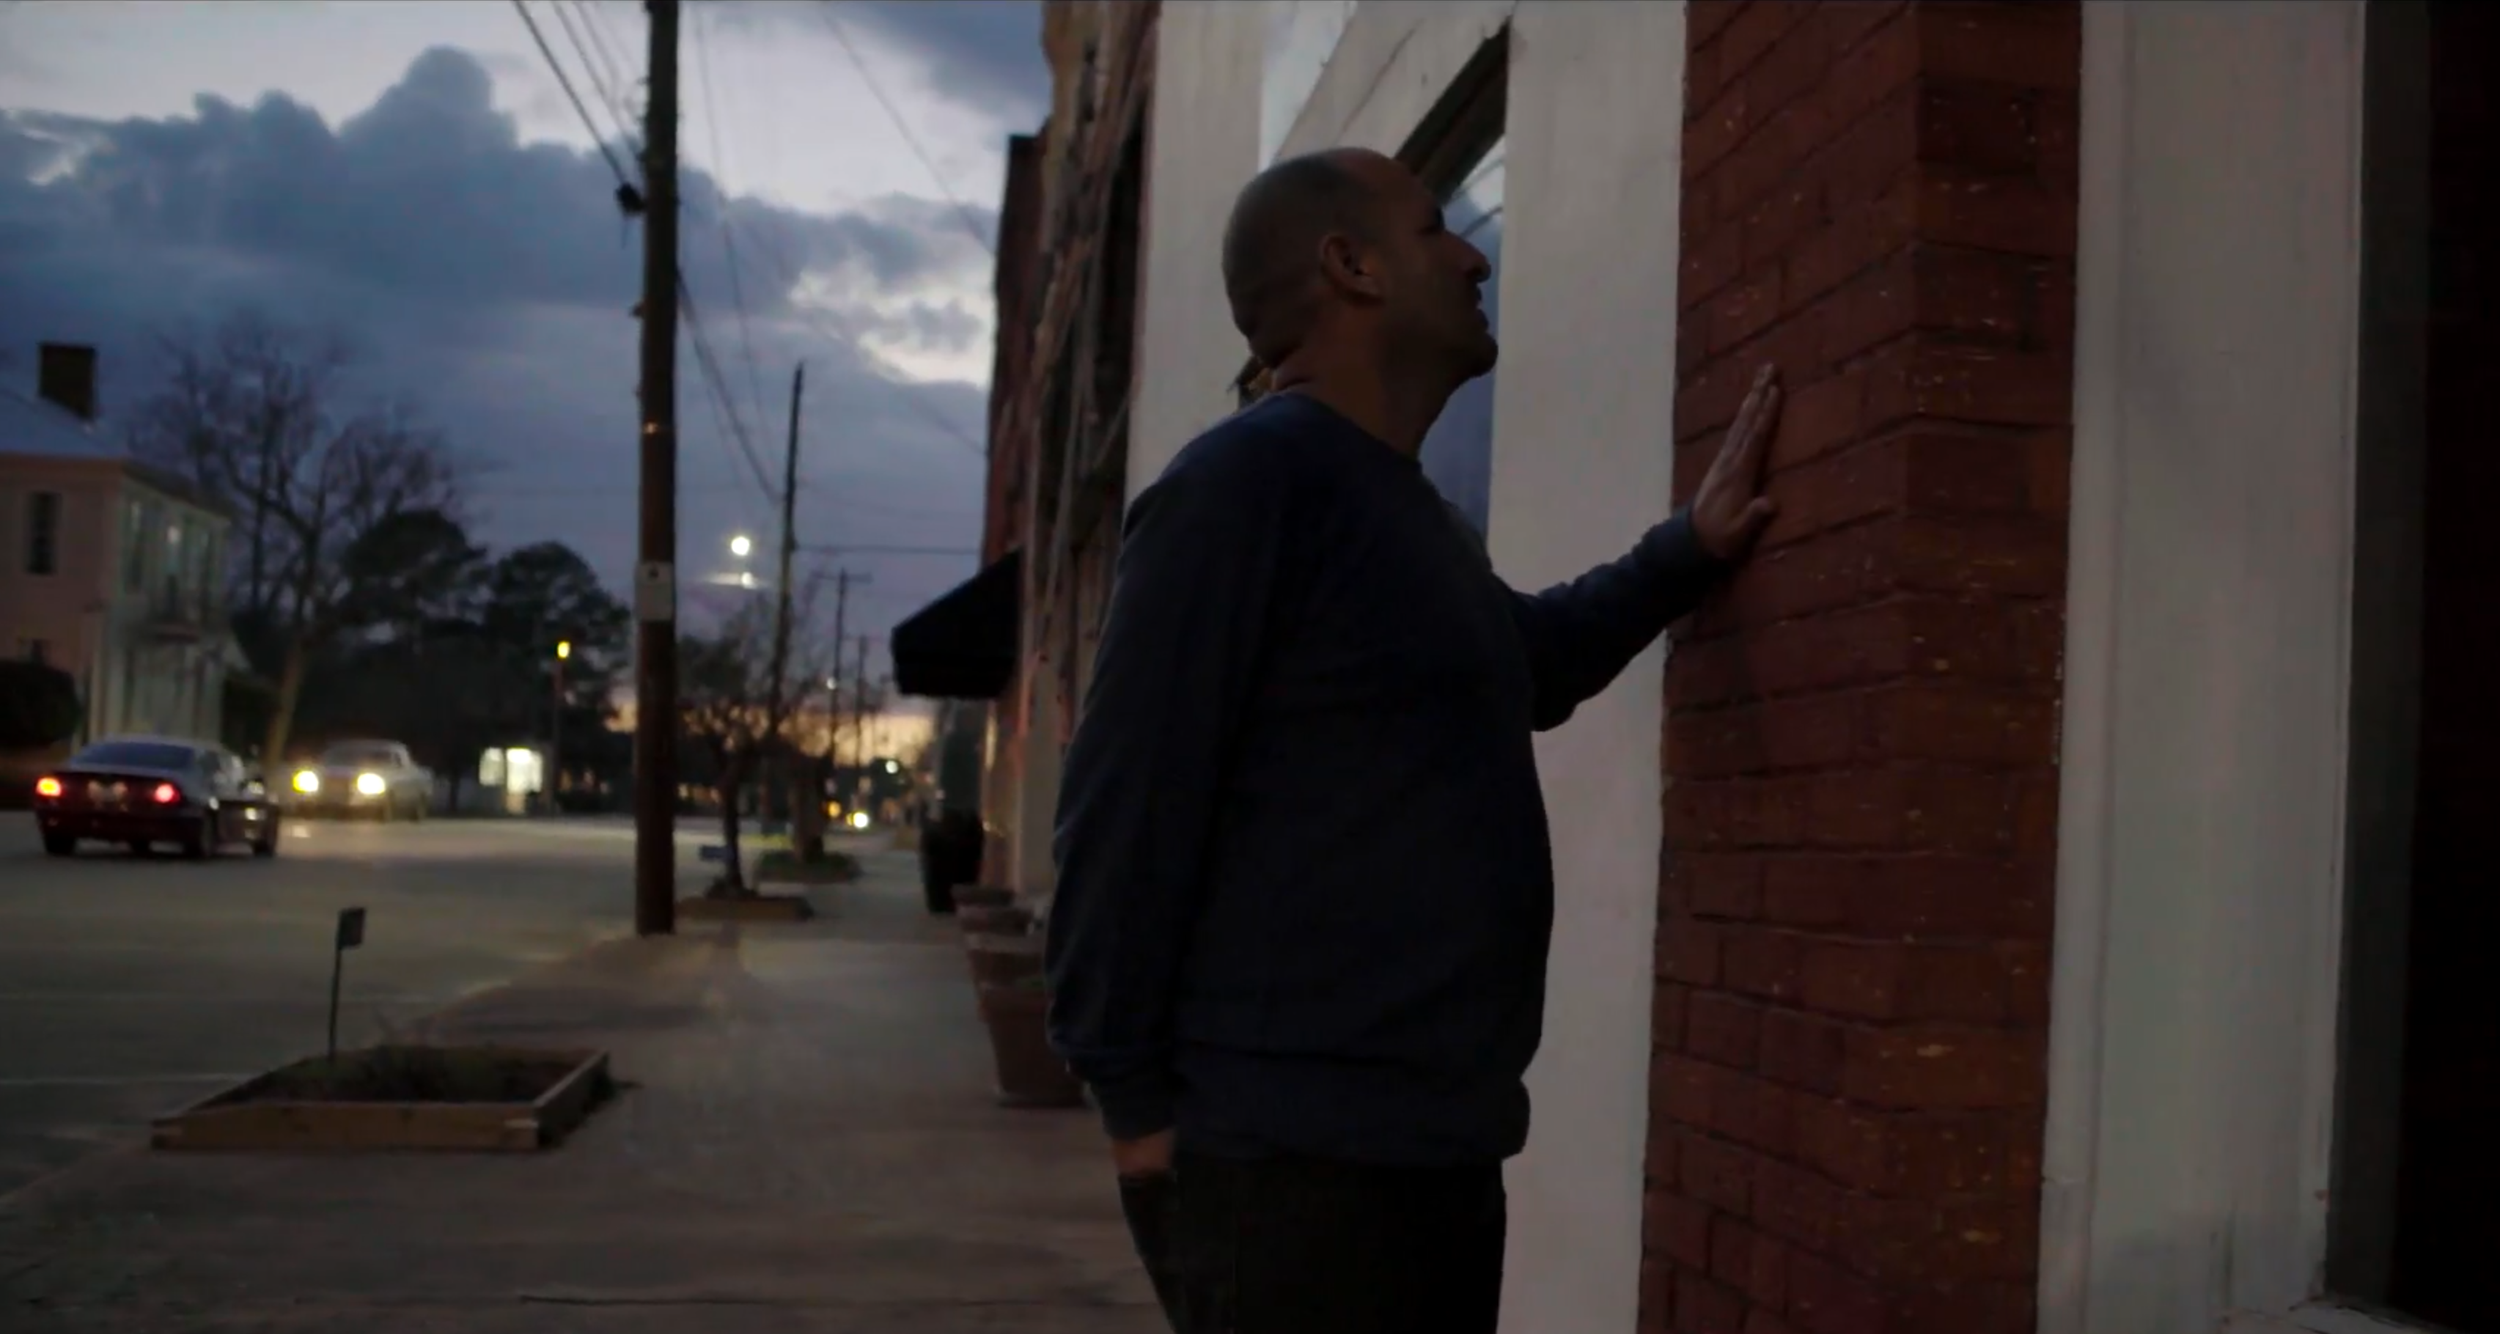 At twilight, a hispanic man places his hand against a brick wall on a small town main street